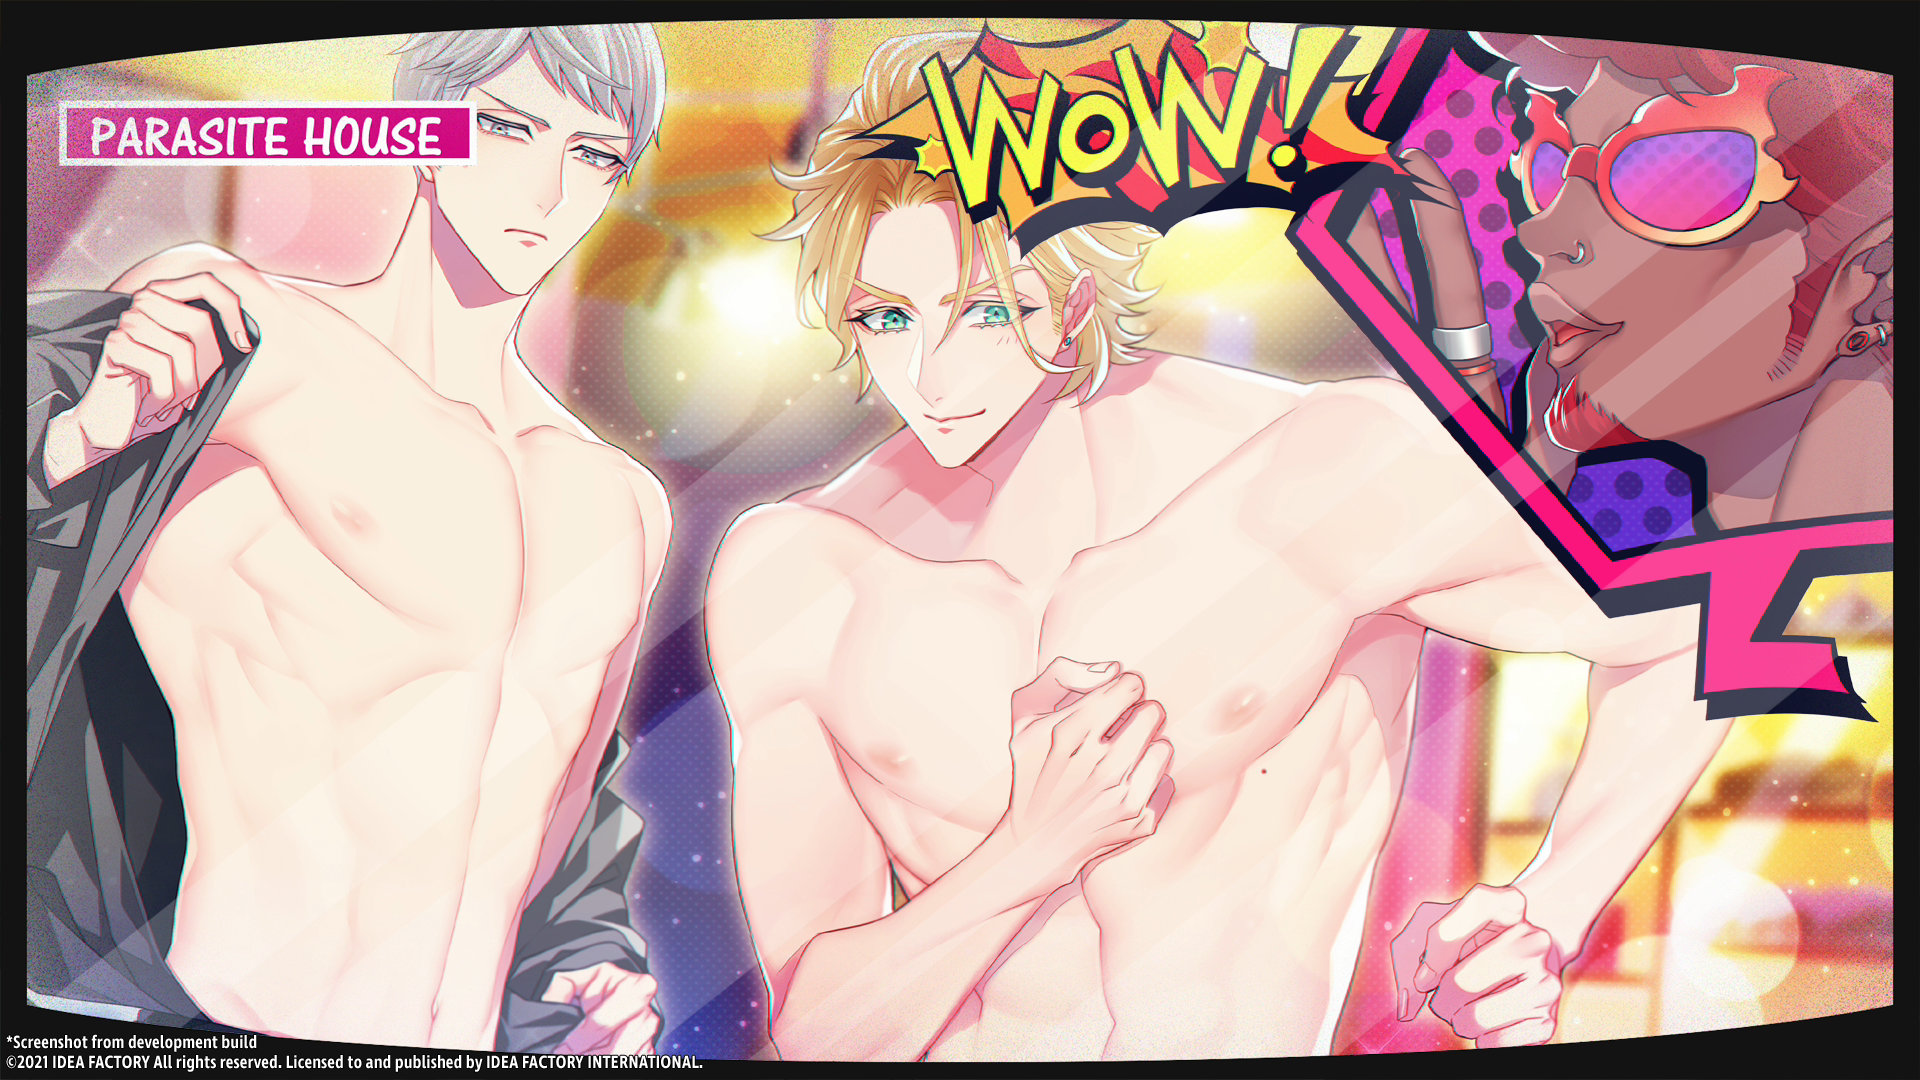 Two shirtless men from Cupid Parasite. Wow, indeed.